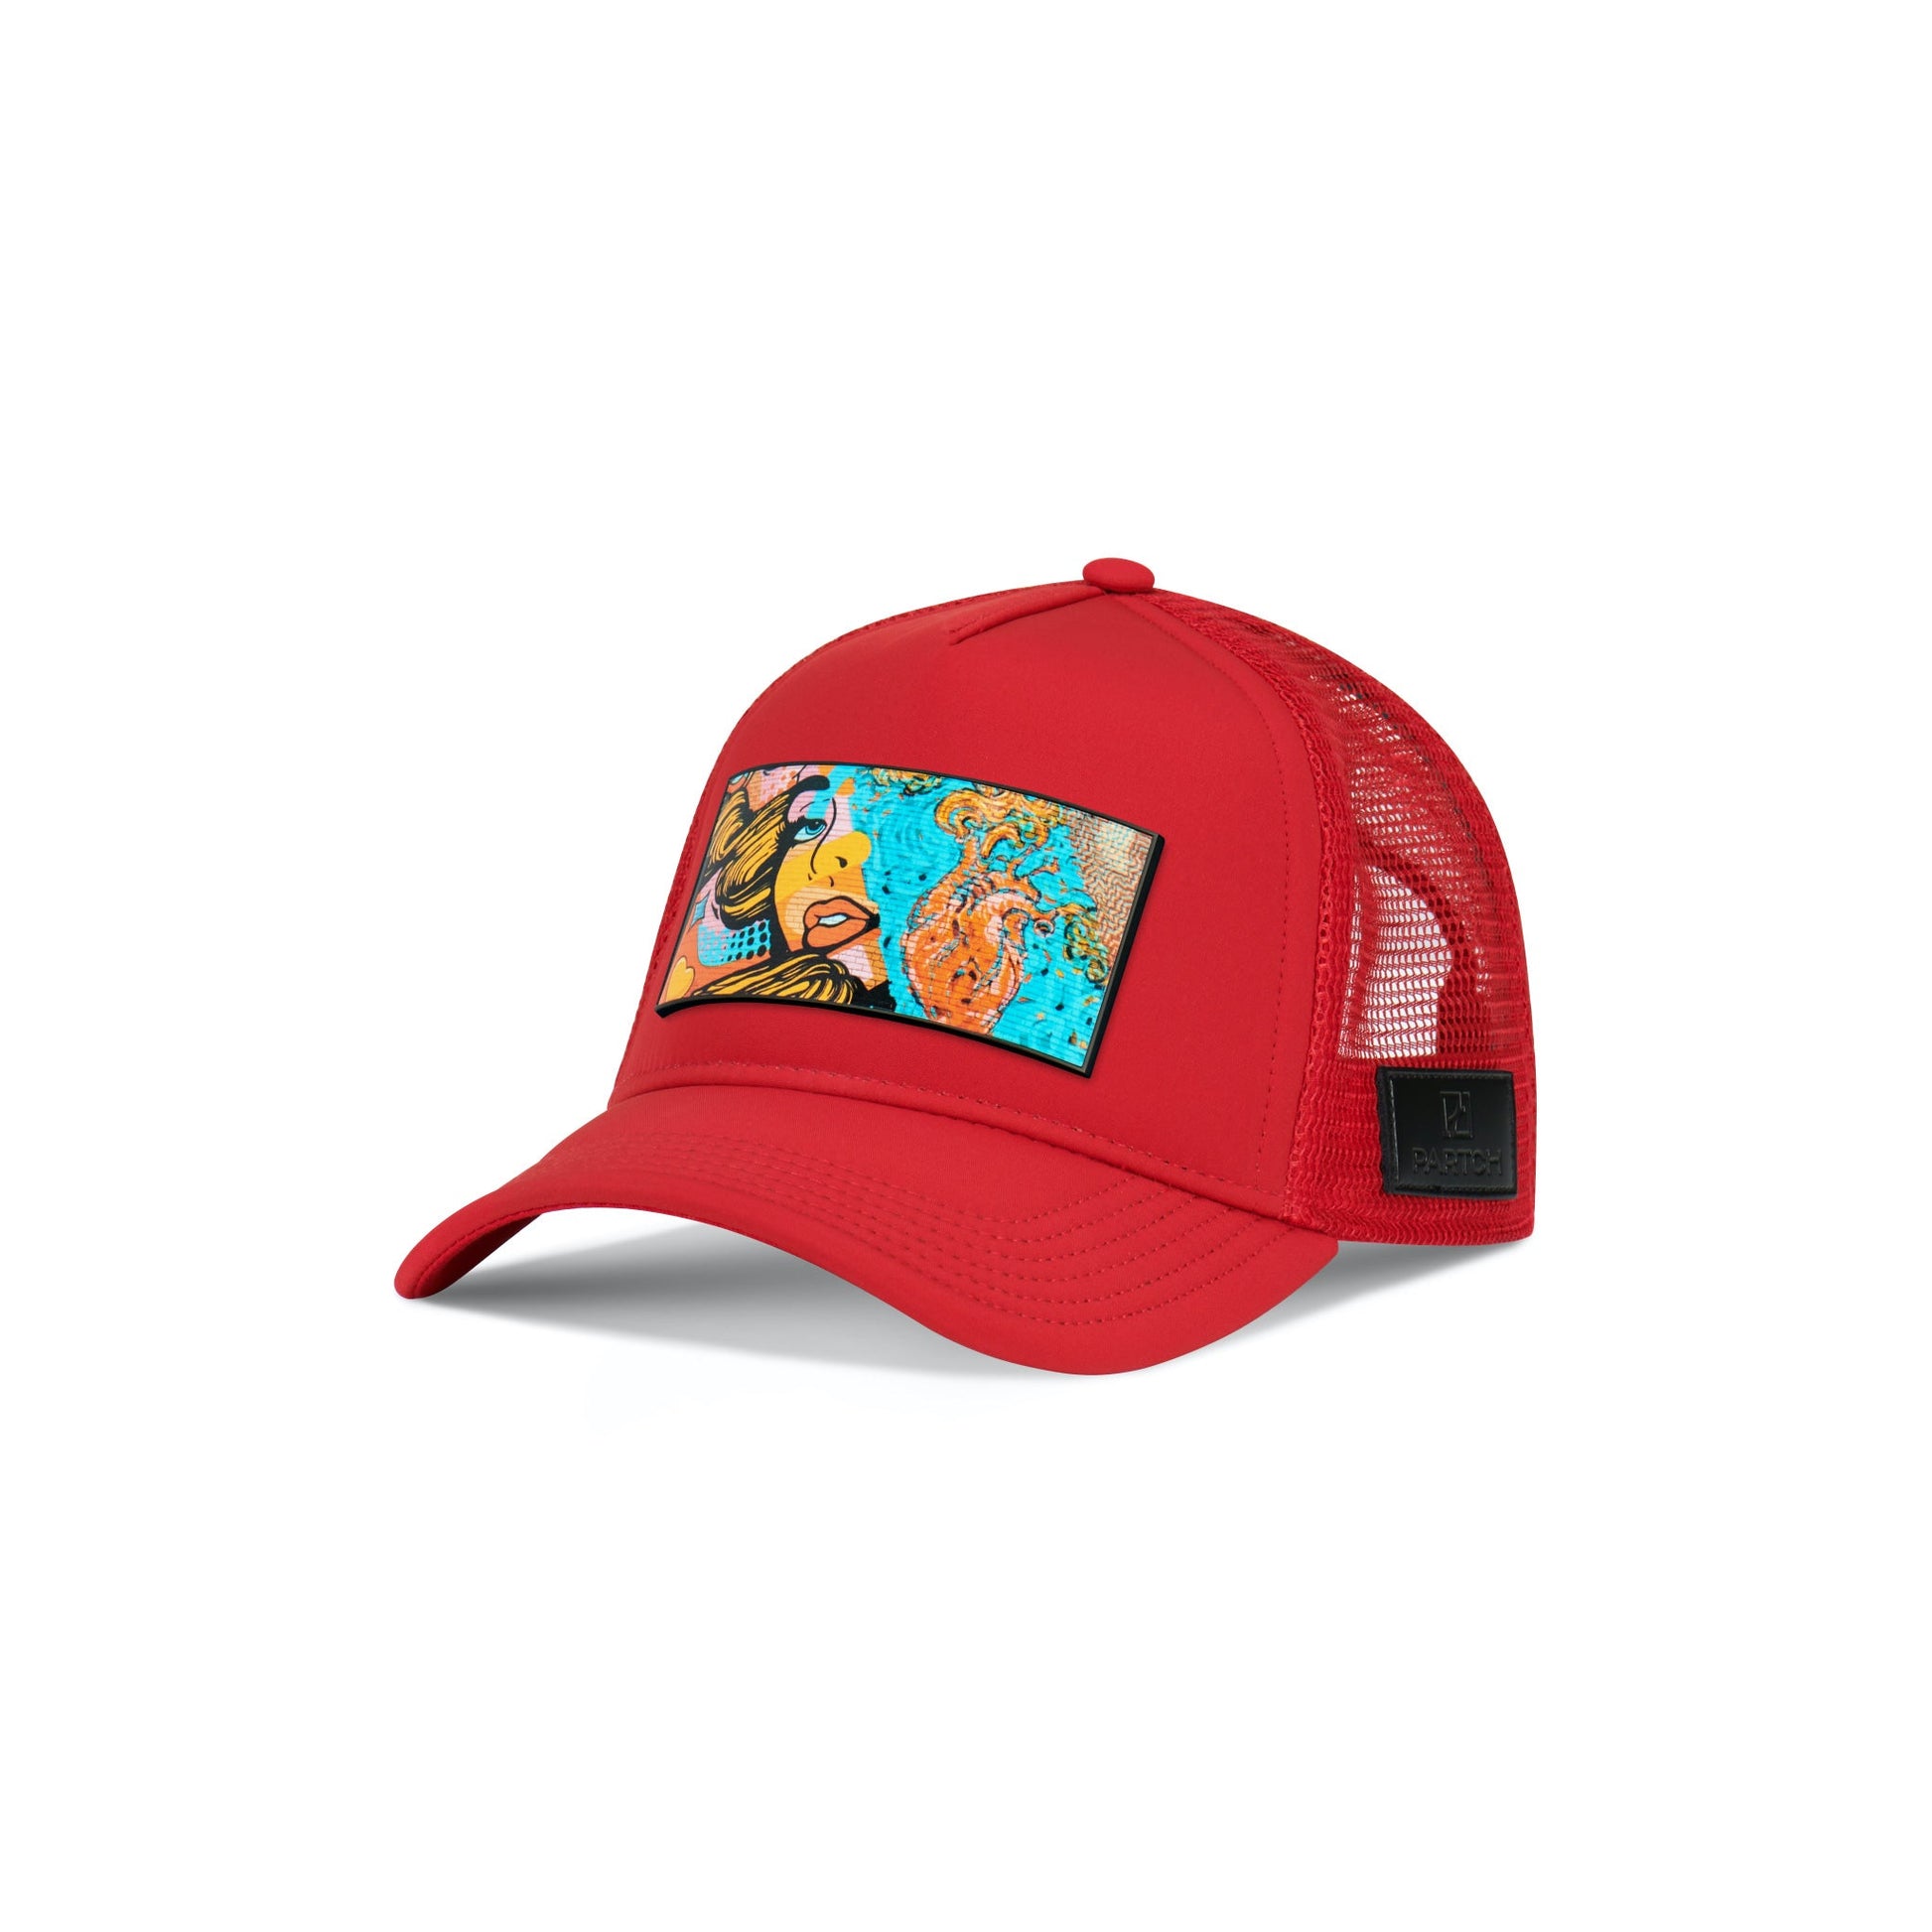 Partch Trucker Hat Red with PARTCH-Clip Exsyt Front View